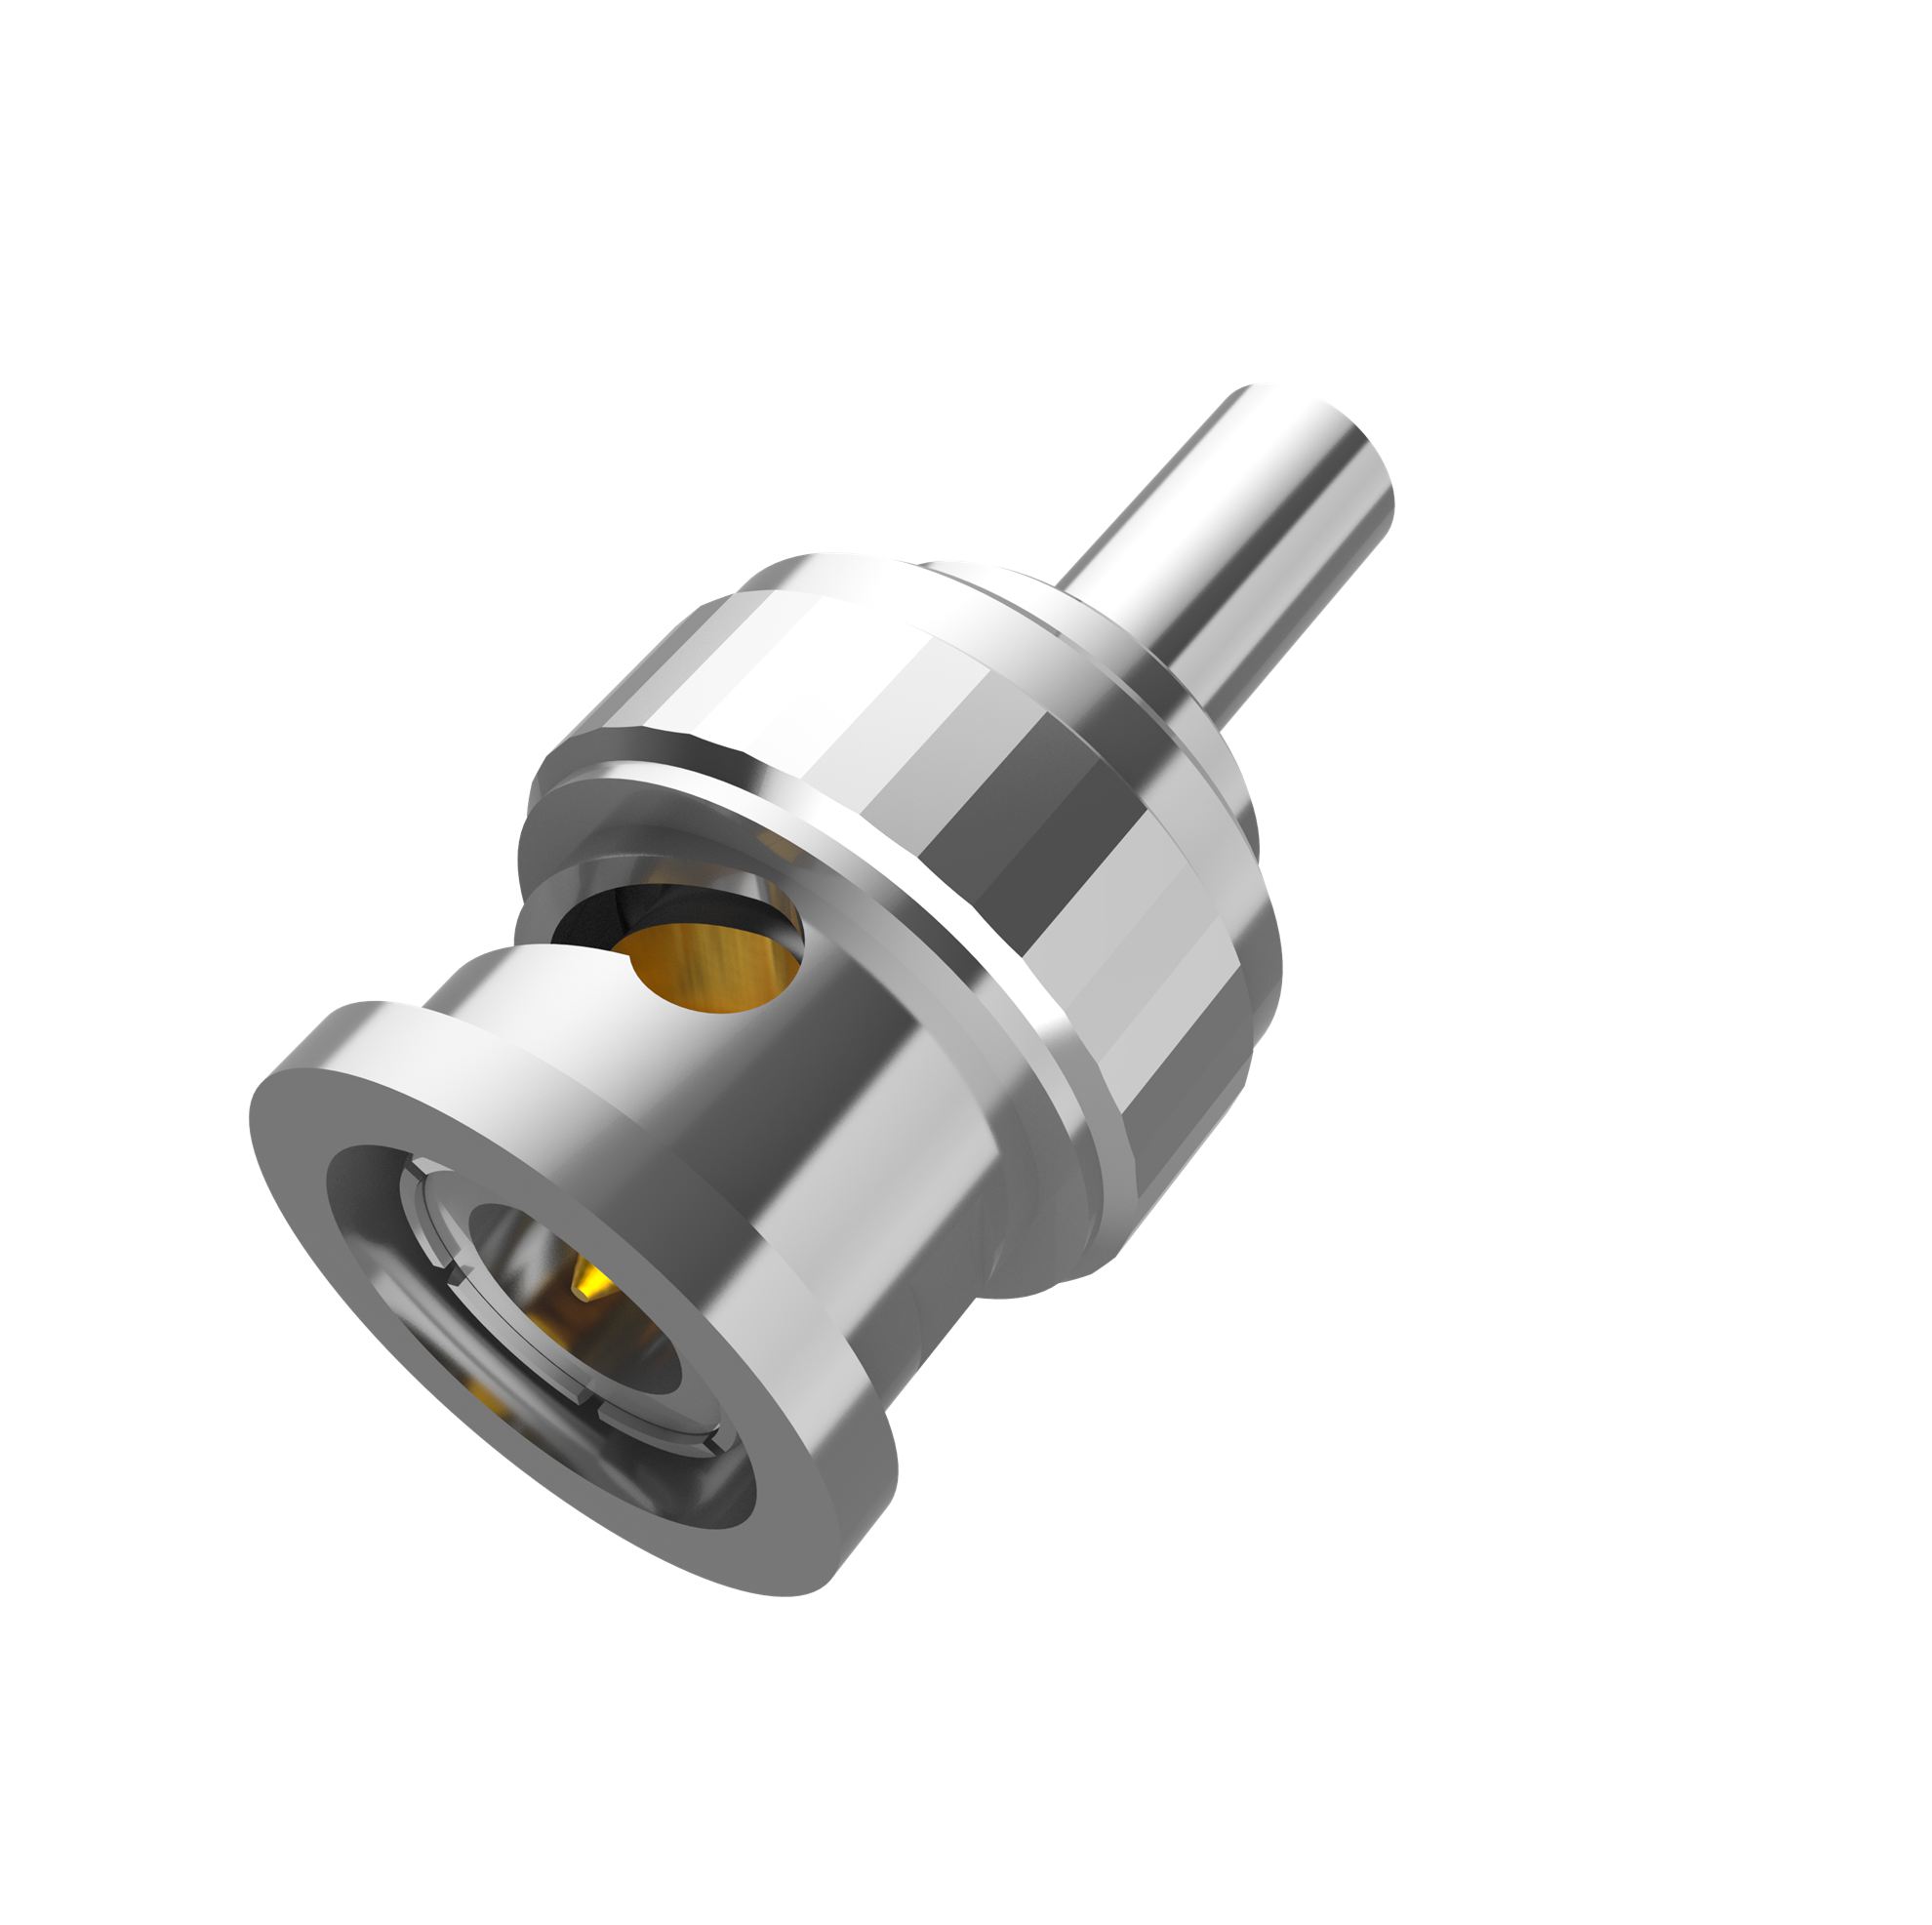 BNC Connector Plug Crimp Straight For ST212 Cable